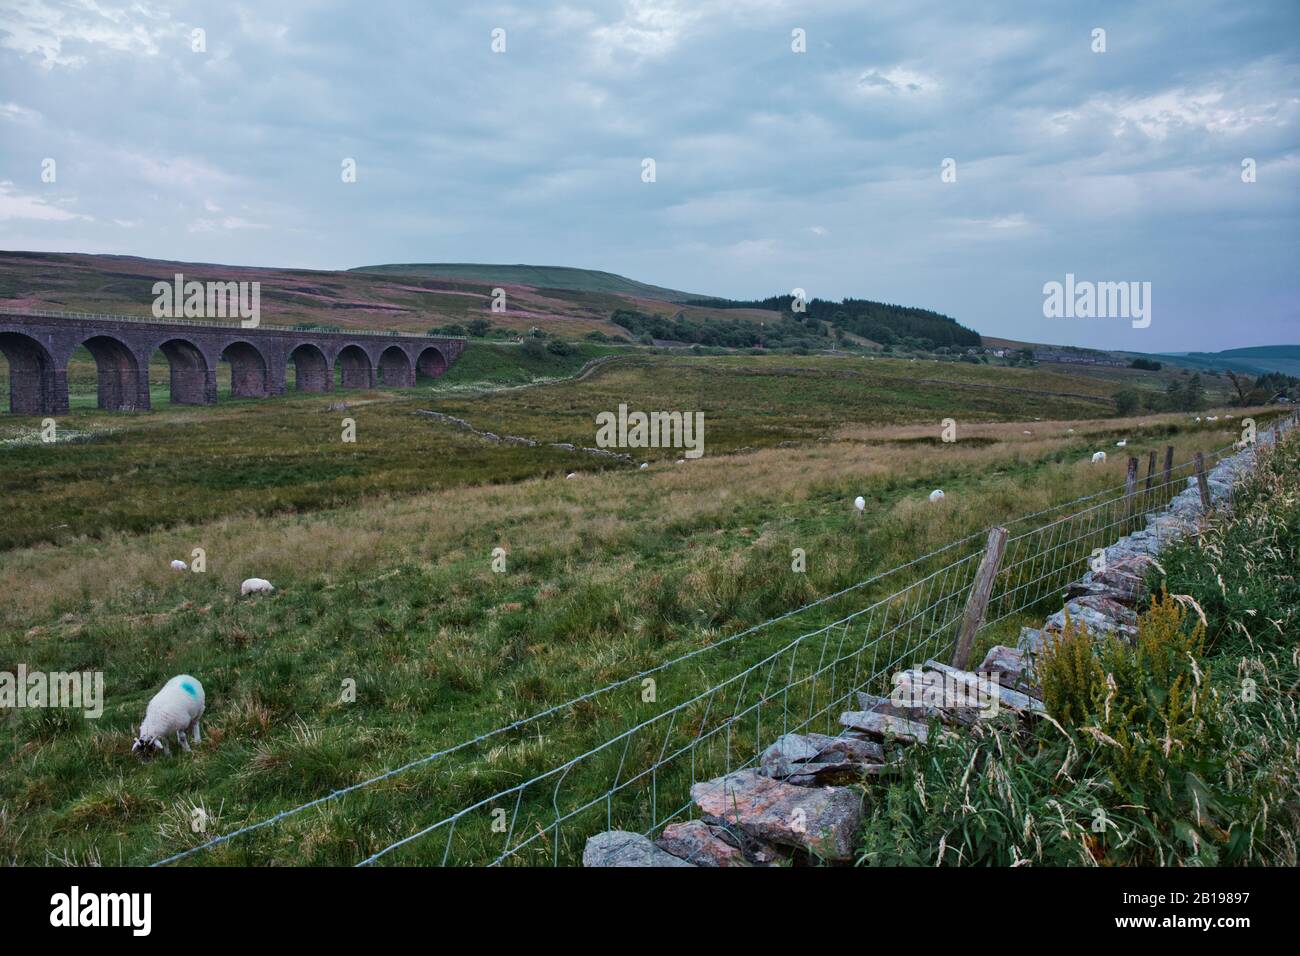 Ribblehead Viaduct which carries the Settle-Carlisle railway line across the Ribble Valley, Ribblehead, North Yorkshire, England Stock Photo